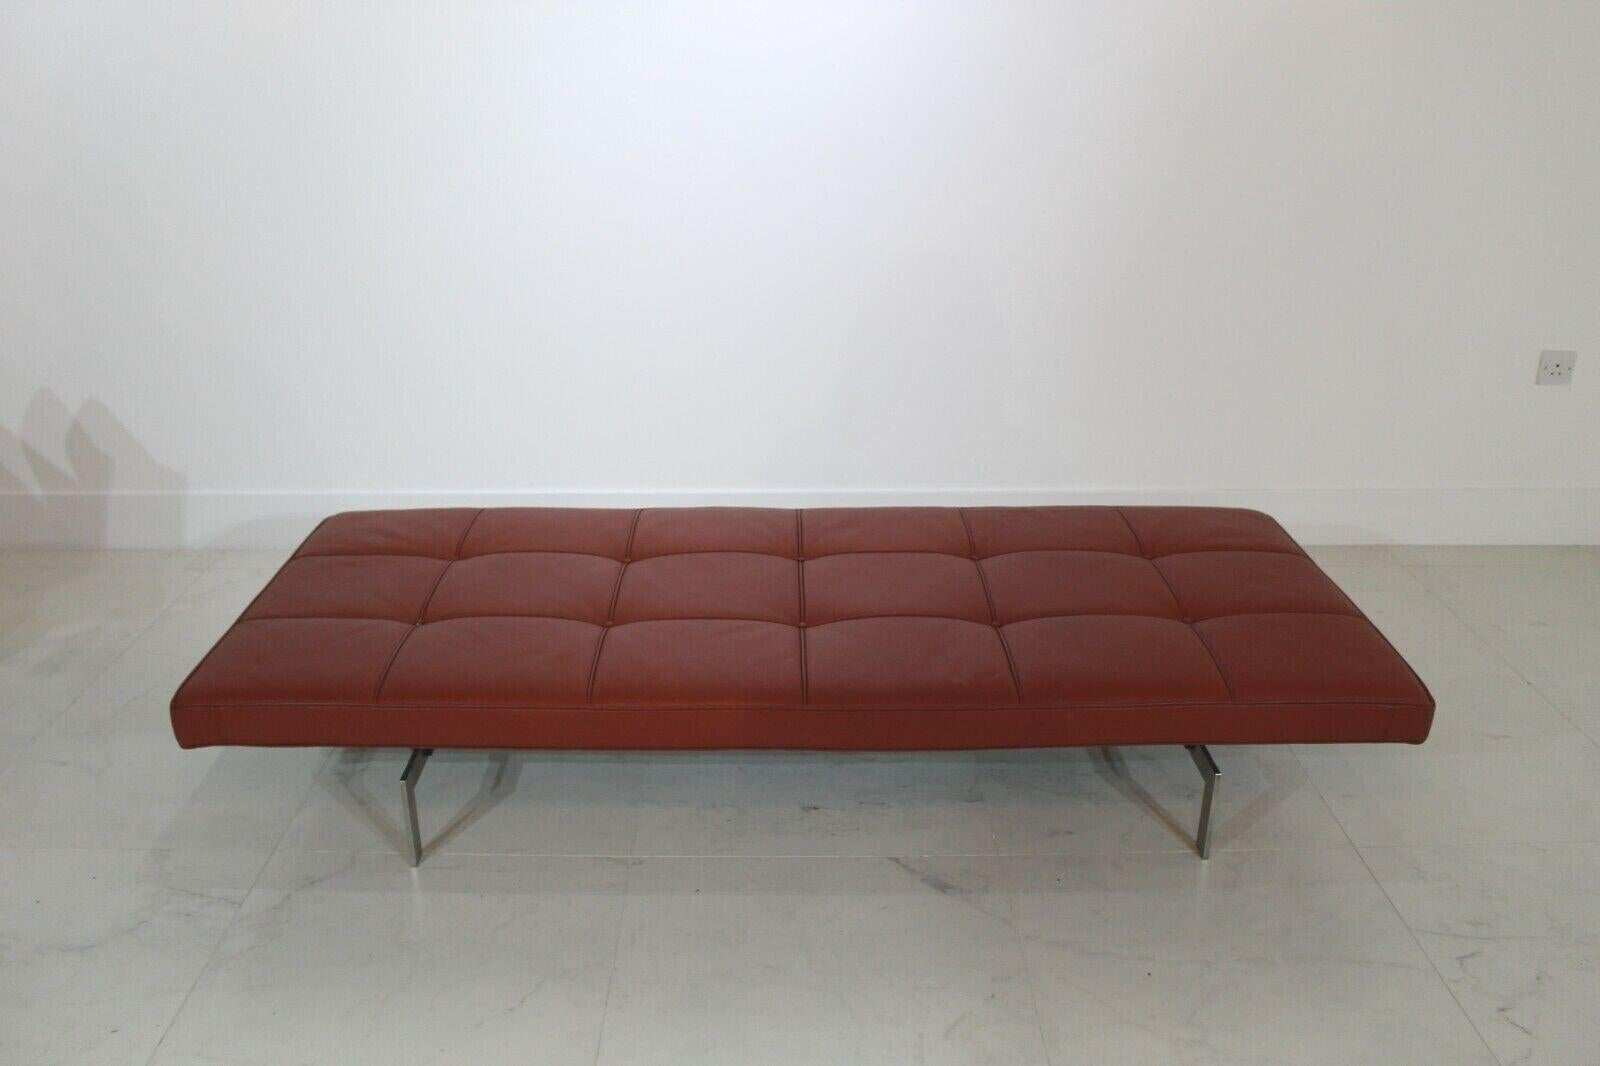 Fritz Hansen PK80 daybed in Burgandy leather designed by Poul Kjaerholm. 

A recent example in nearly new condition, 

Designer Poul Kjaerholm went through an ongoing attempt to combine the sublime with the absolutely necessary, which resulted